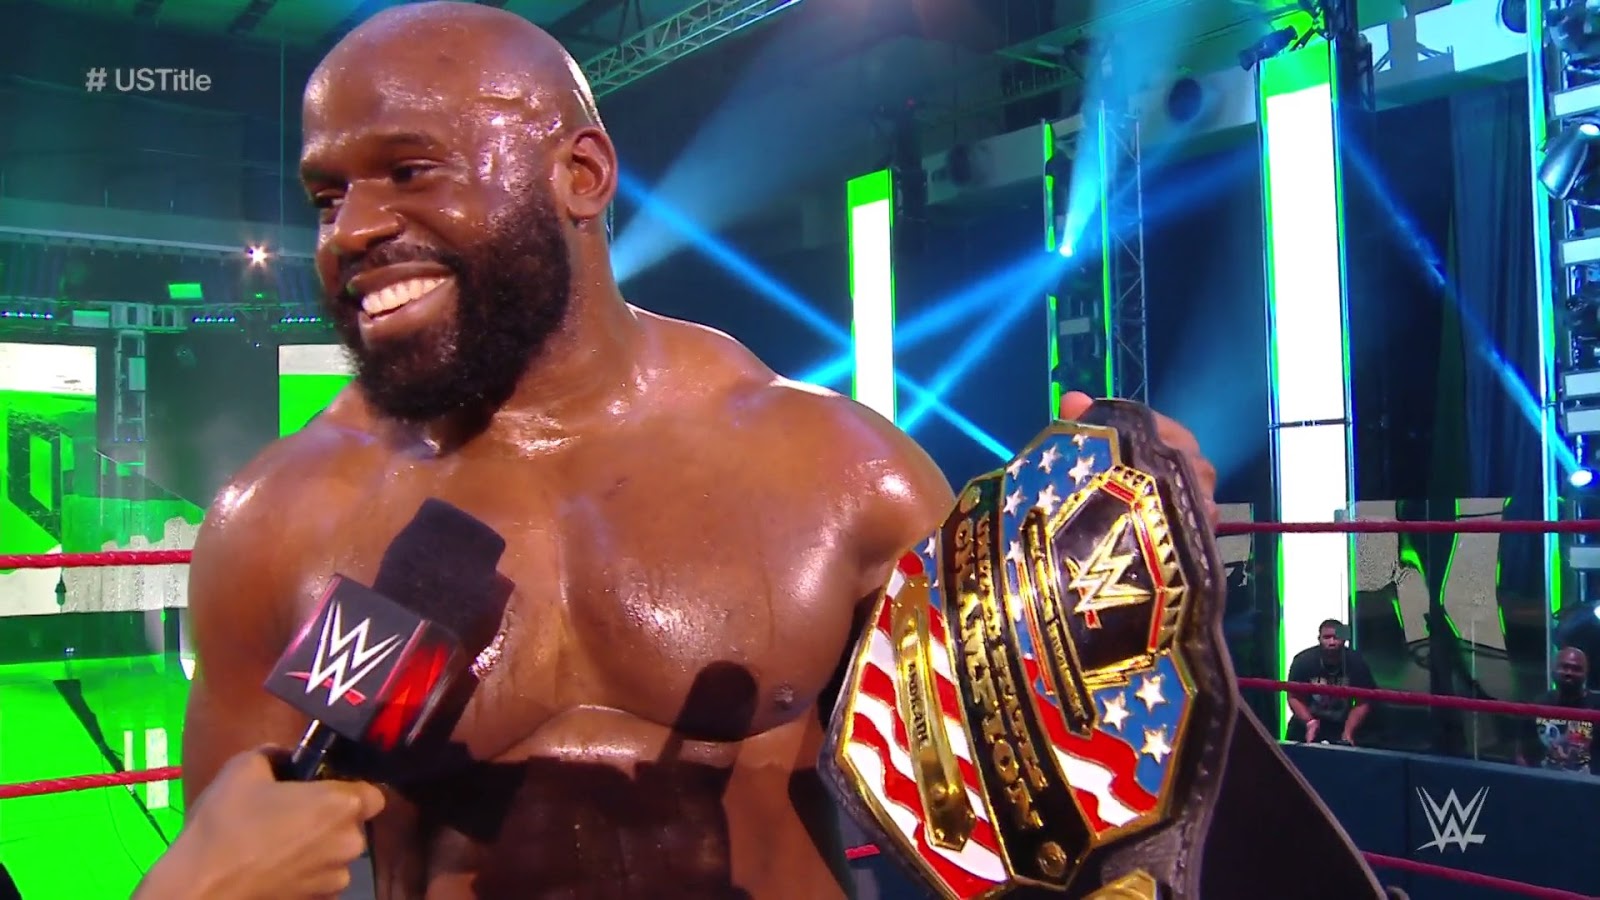 Apollo Crews Becomes the First Nigerian Wrestler to Win the WWE United States Championship